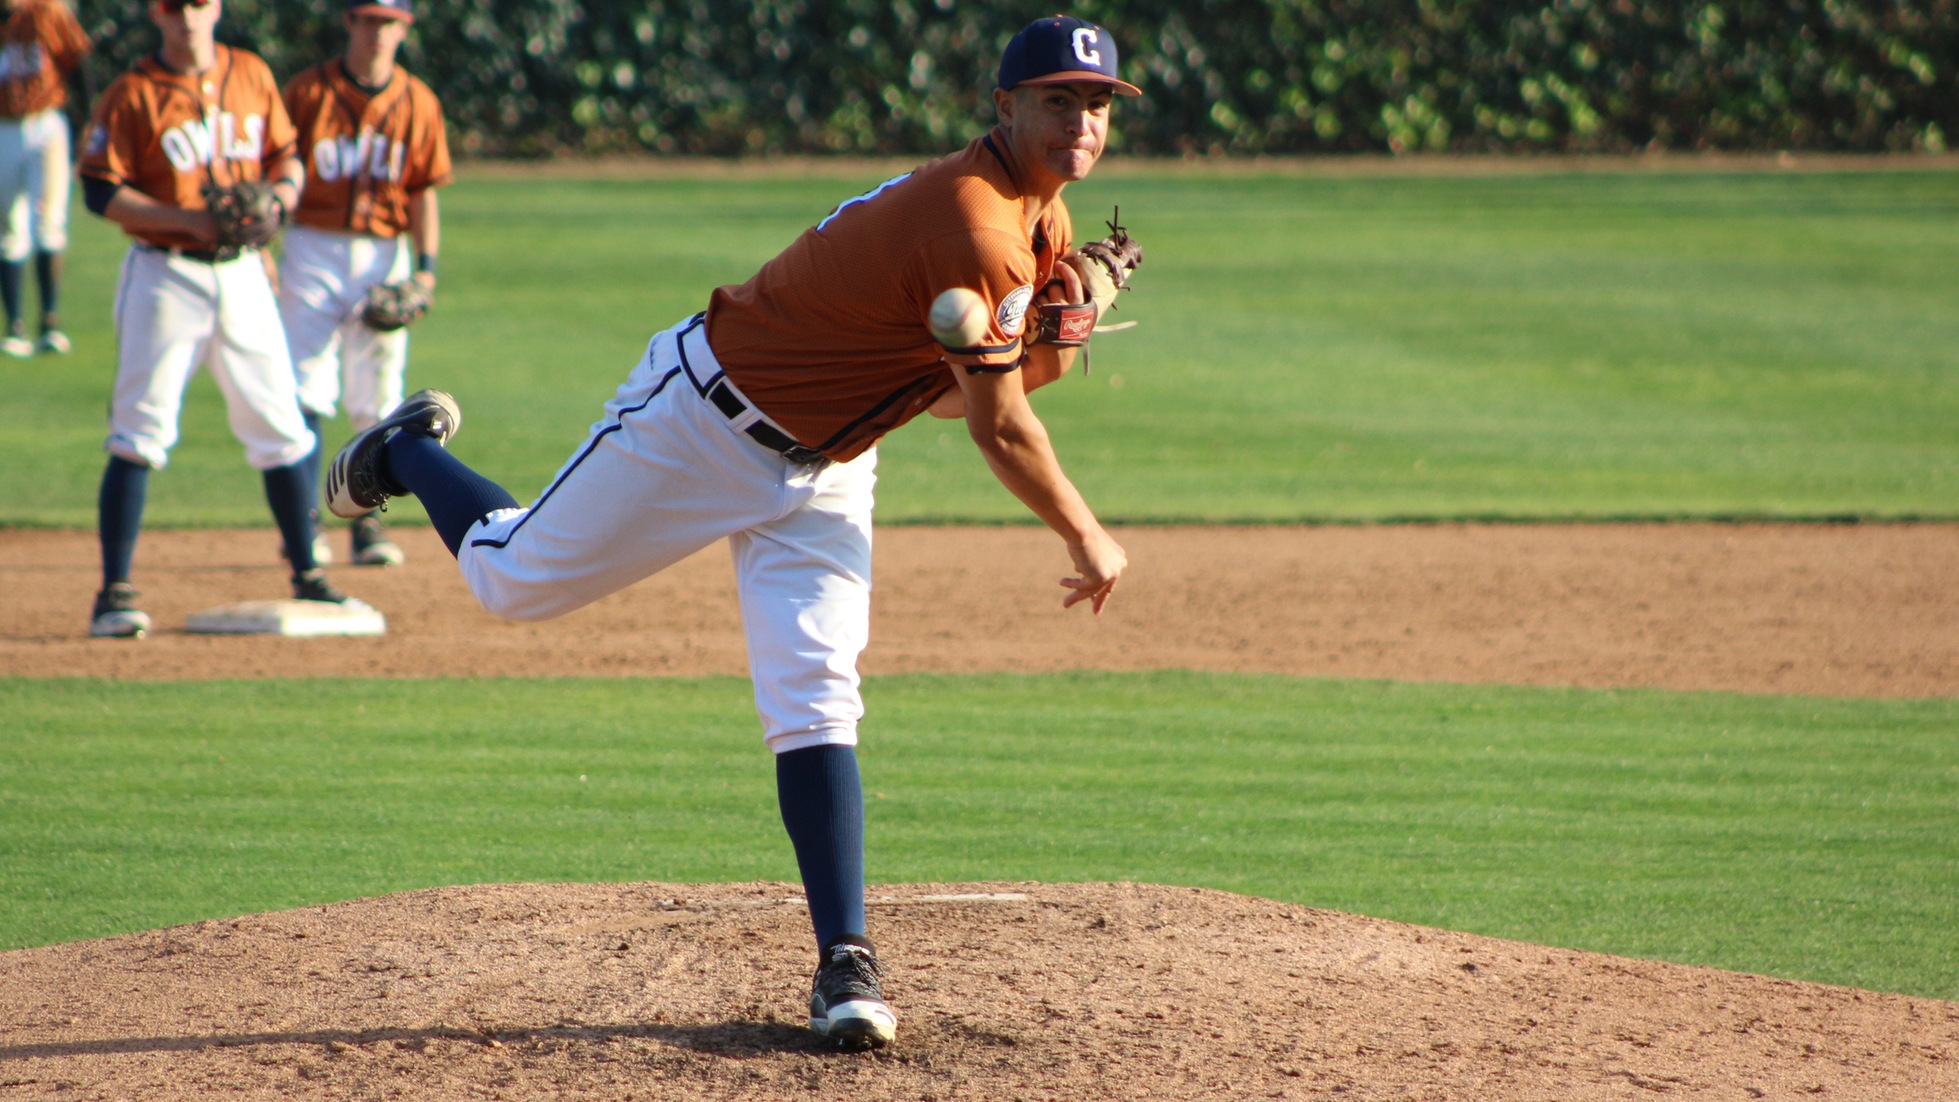 Enrique Zaldivar came in on relief and threw dimes for the Owls, striking out three batters of his own in two innings of action. Photo by: Brianna Jara.